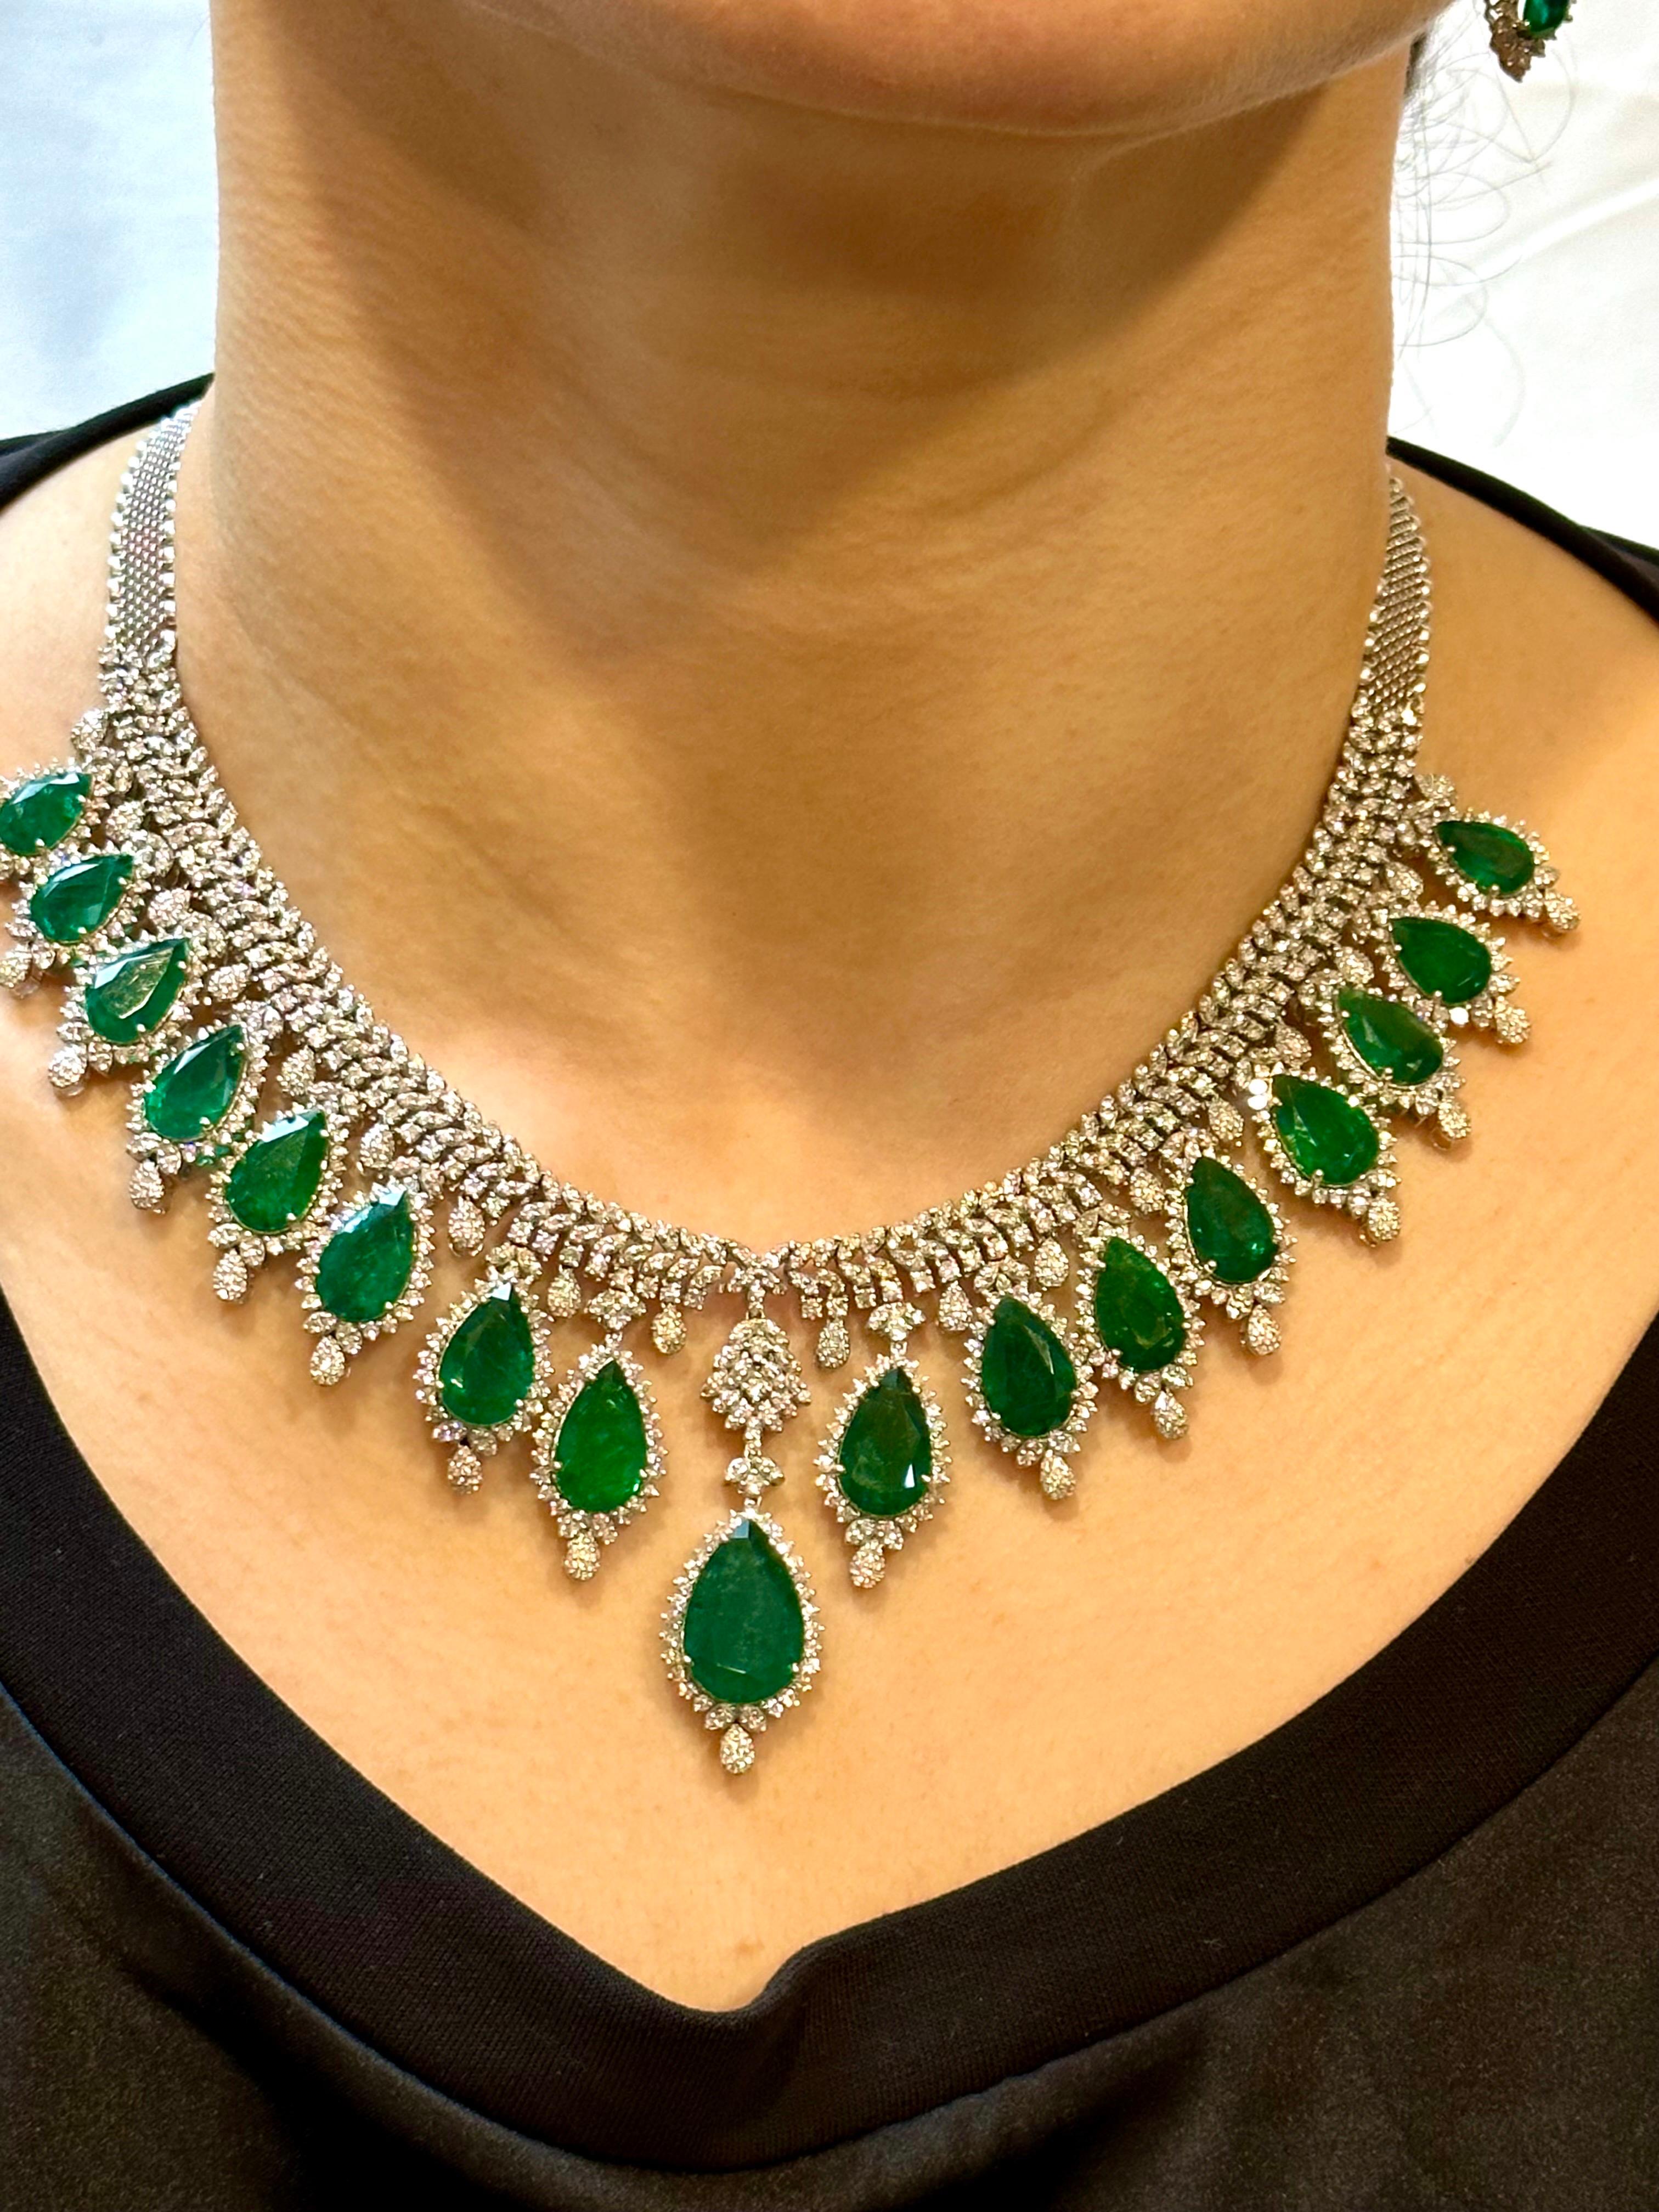 73ct Zambian Emerald and 22ct Diamond Necklace and Earring Bridal Suite For Sale 6